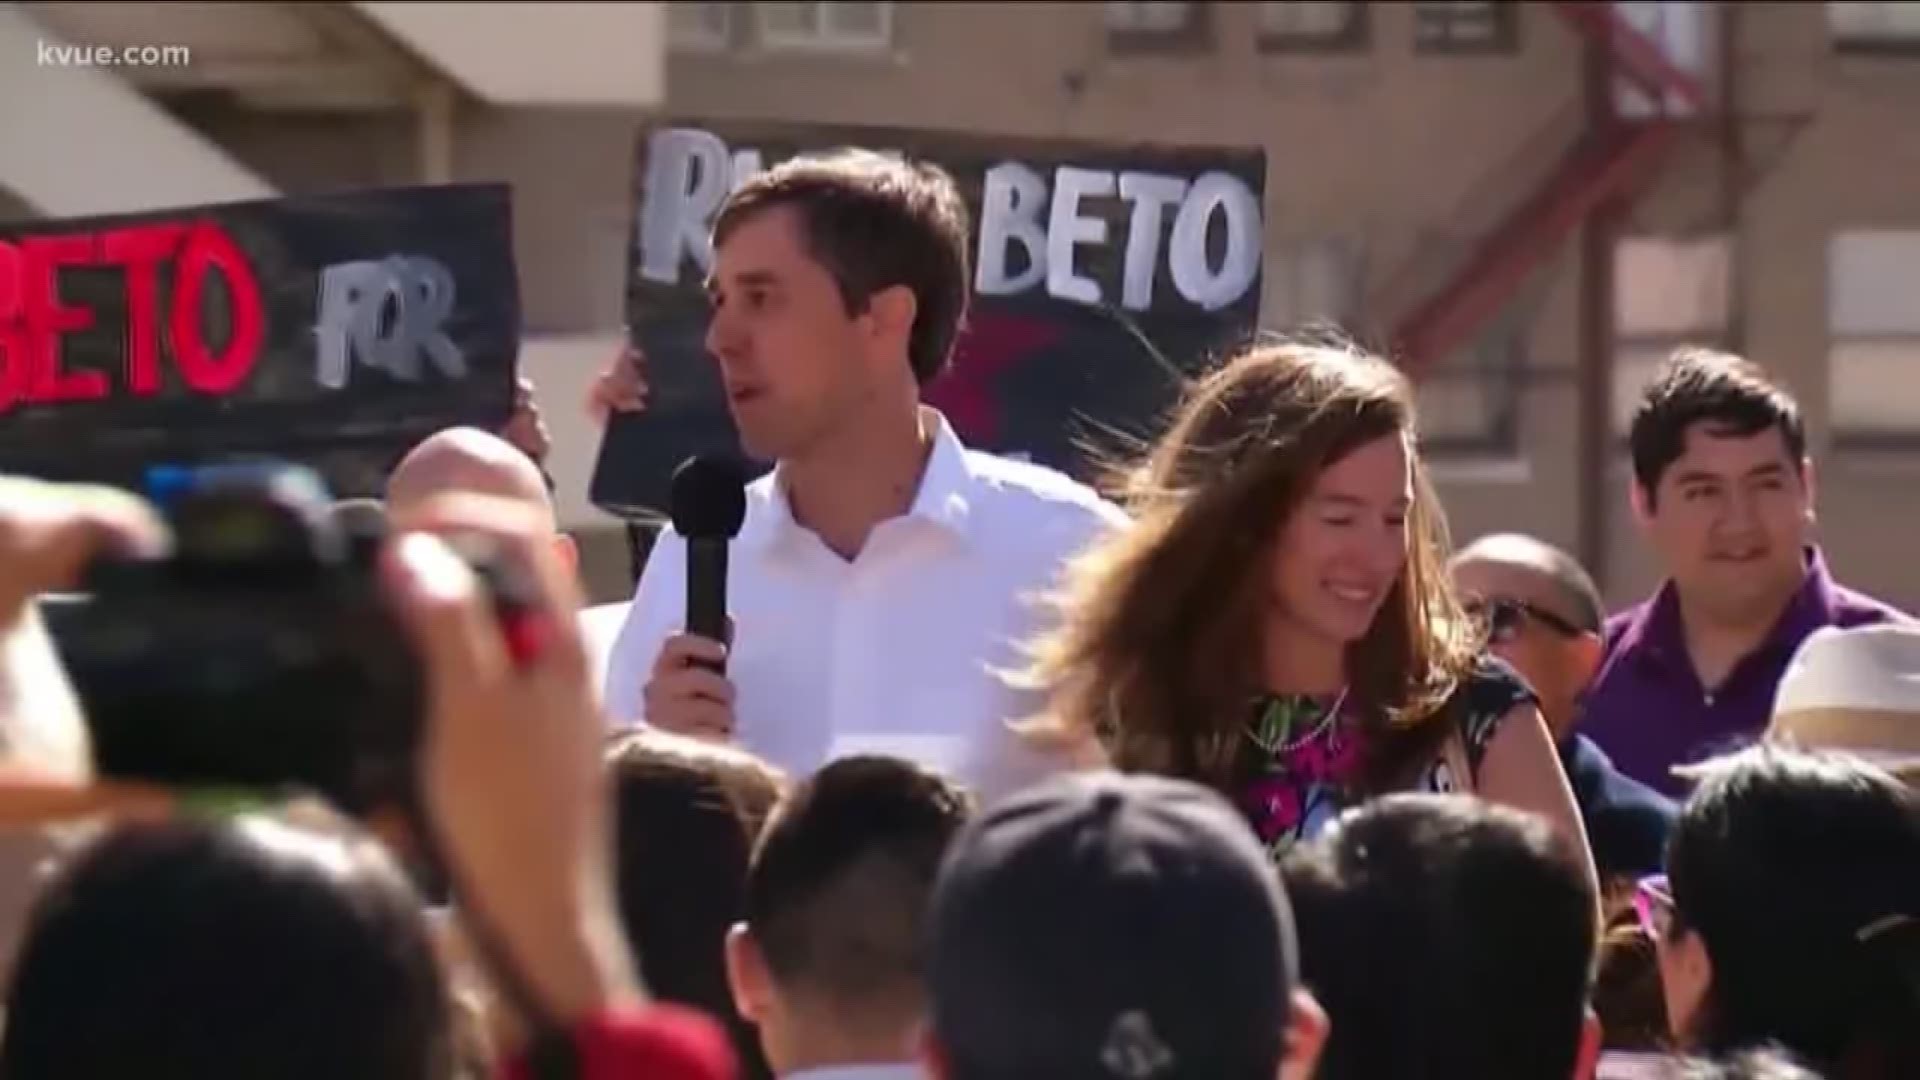 Beto O'Rourke is taking the possibility of running for president one step further.